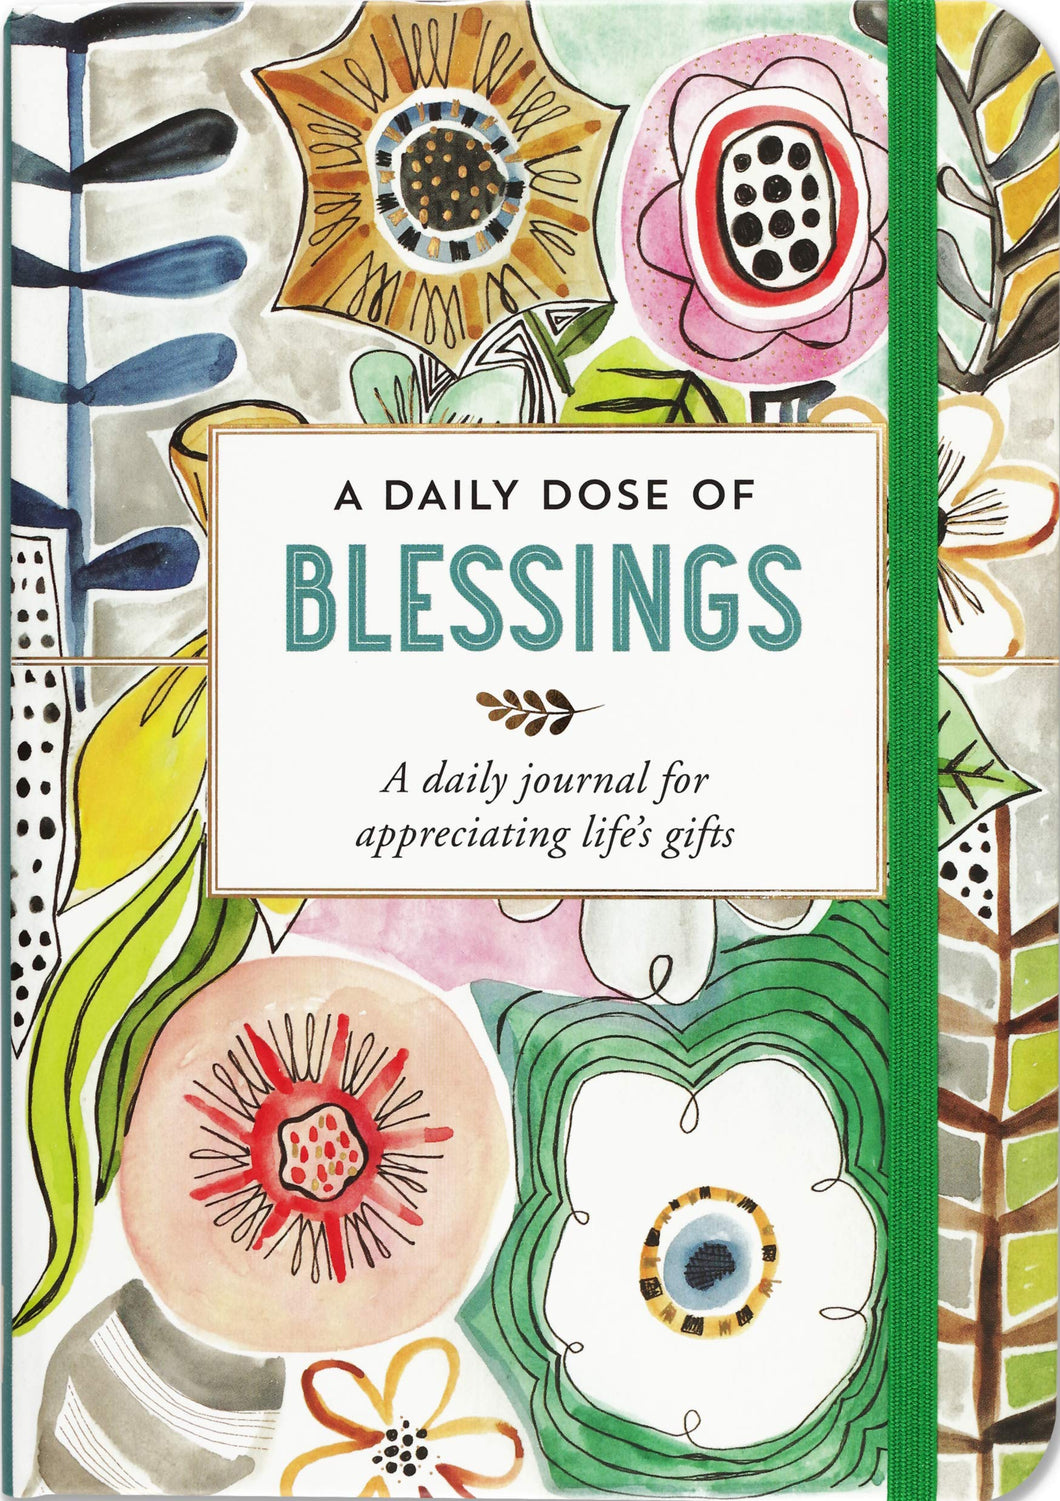 JOURNAL - A DAILY DOSE OF BLESSINGS